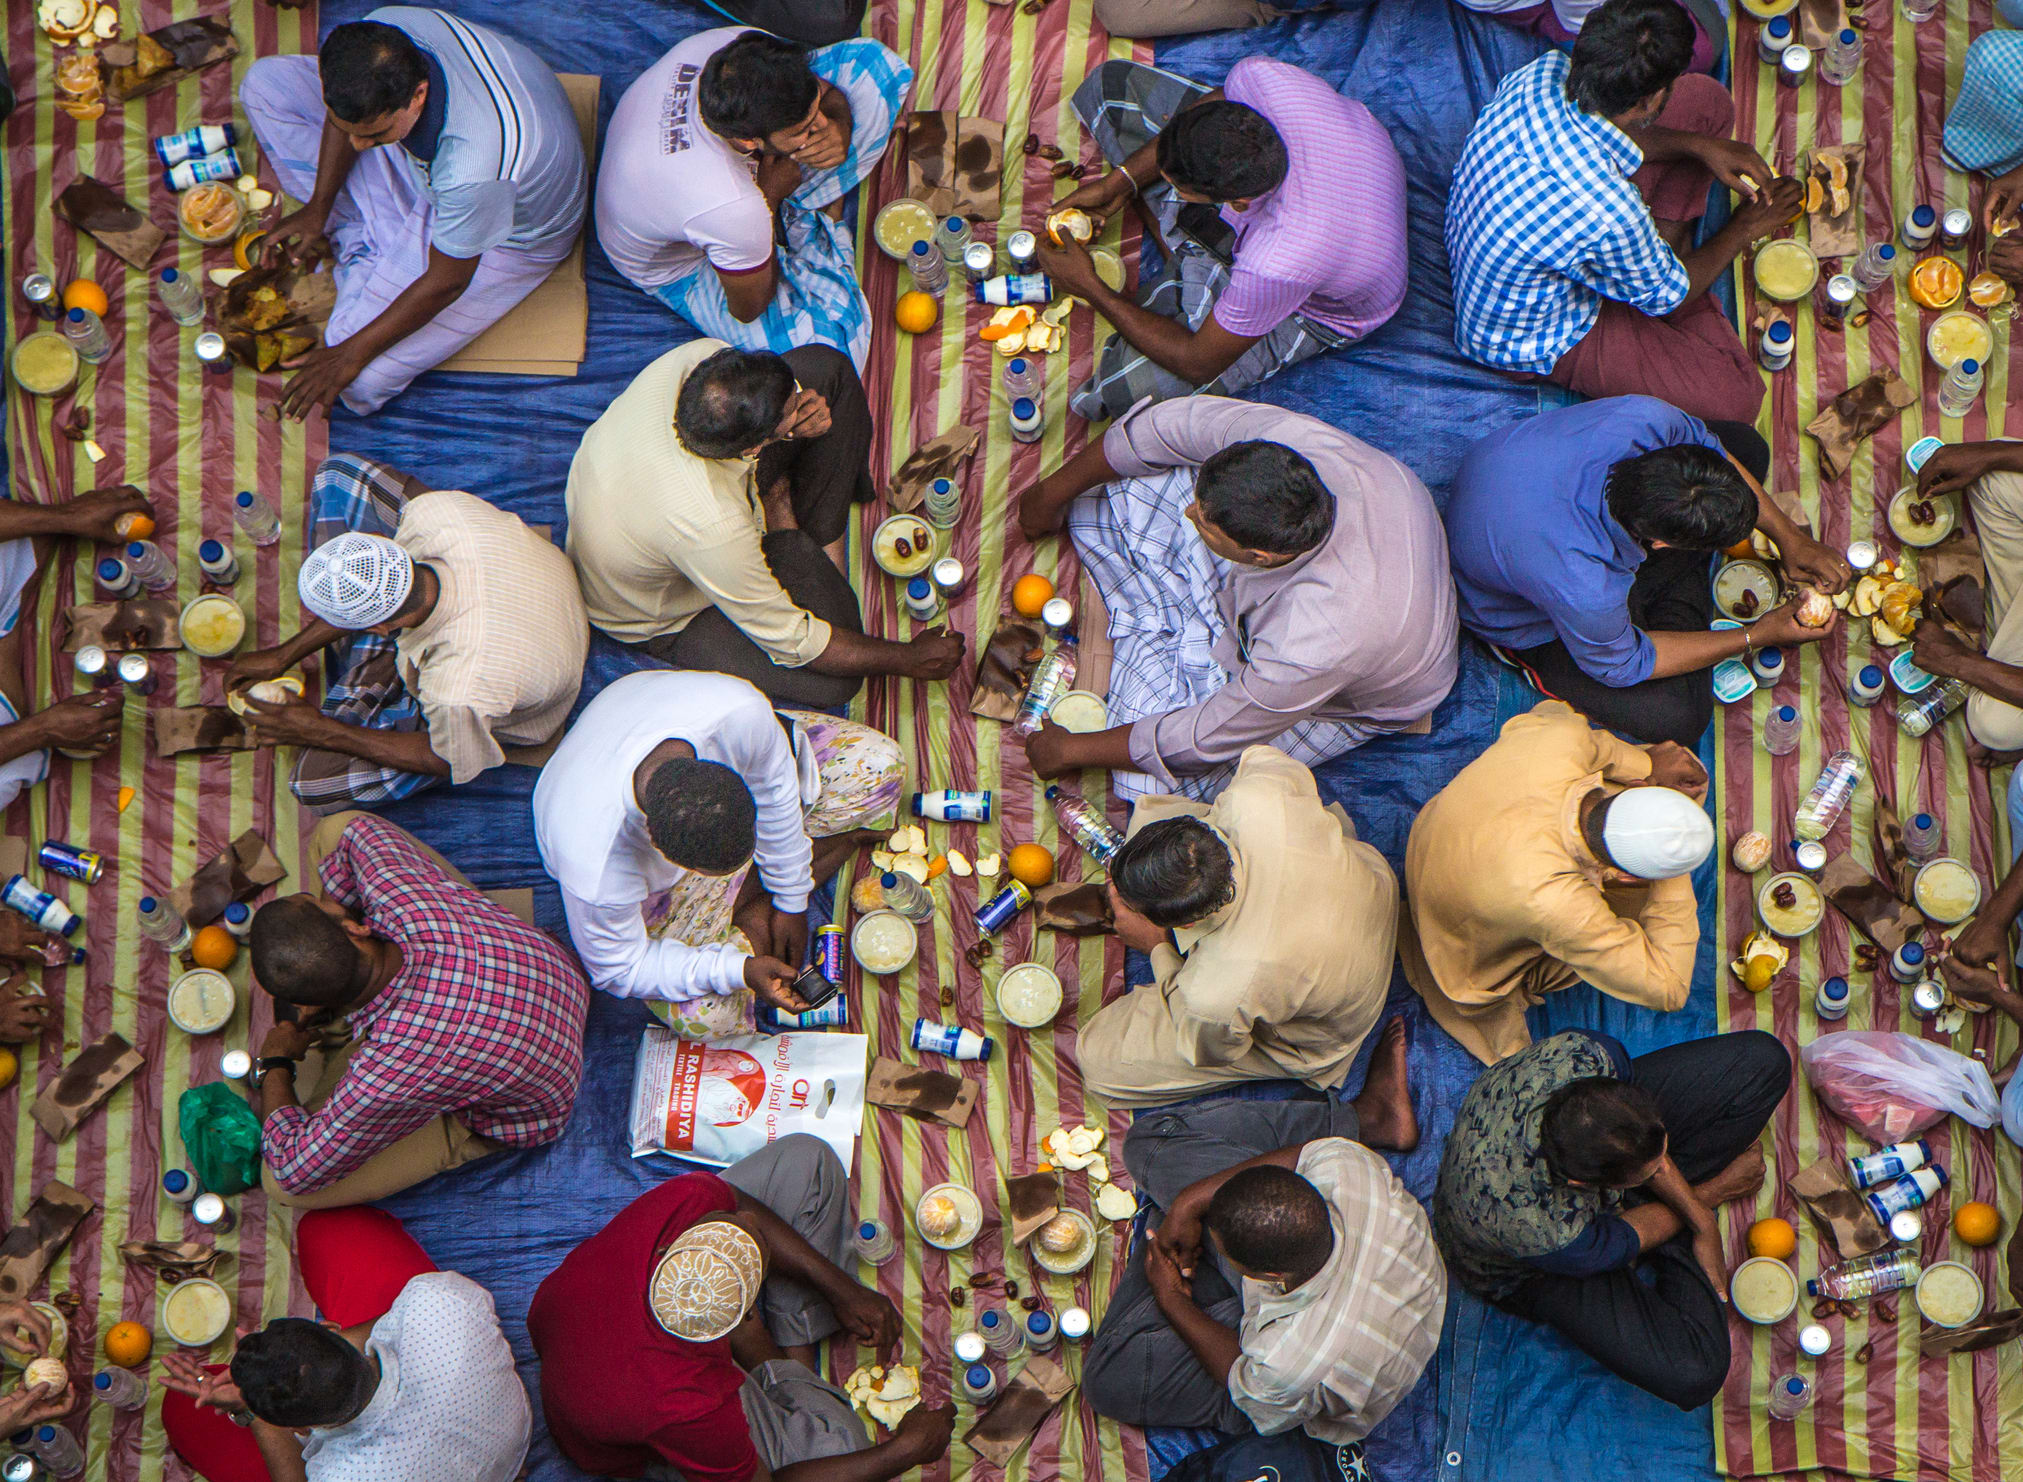 Dubai, UAE - July 16, 2016: Muslim men gathering for a communal charity iftar organised on a street by a local mosque.